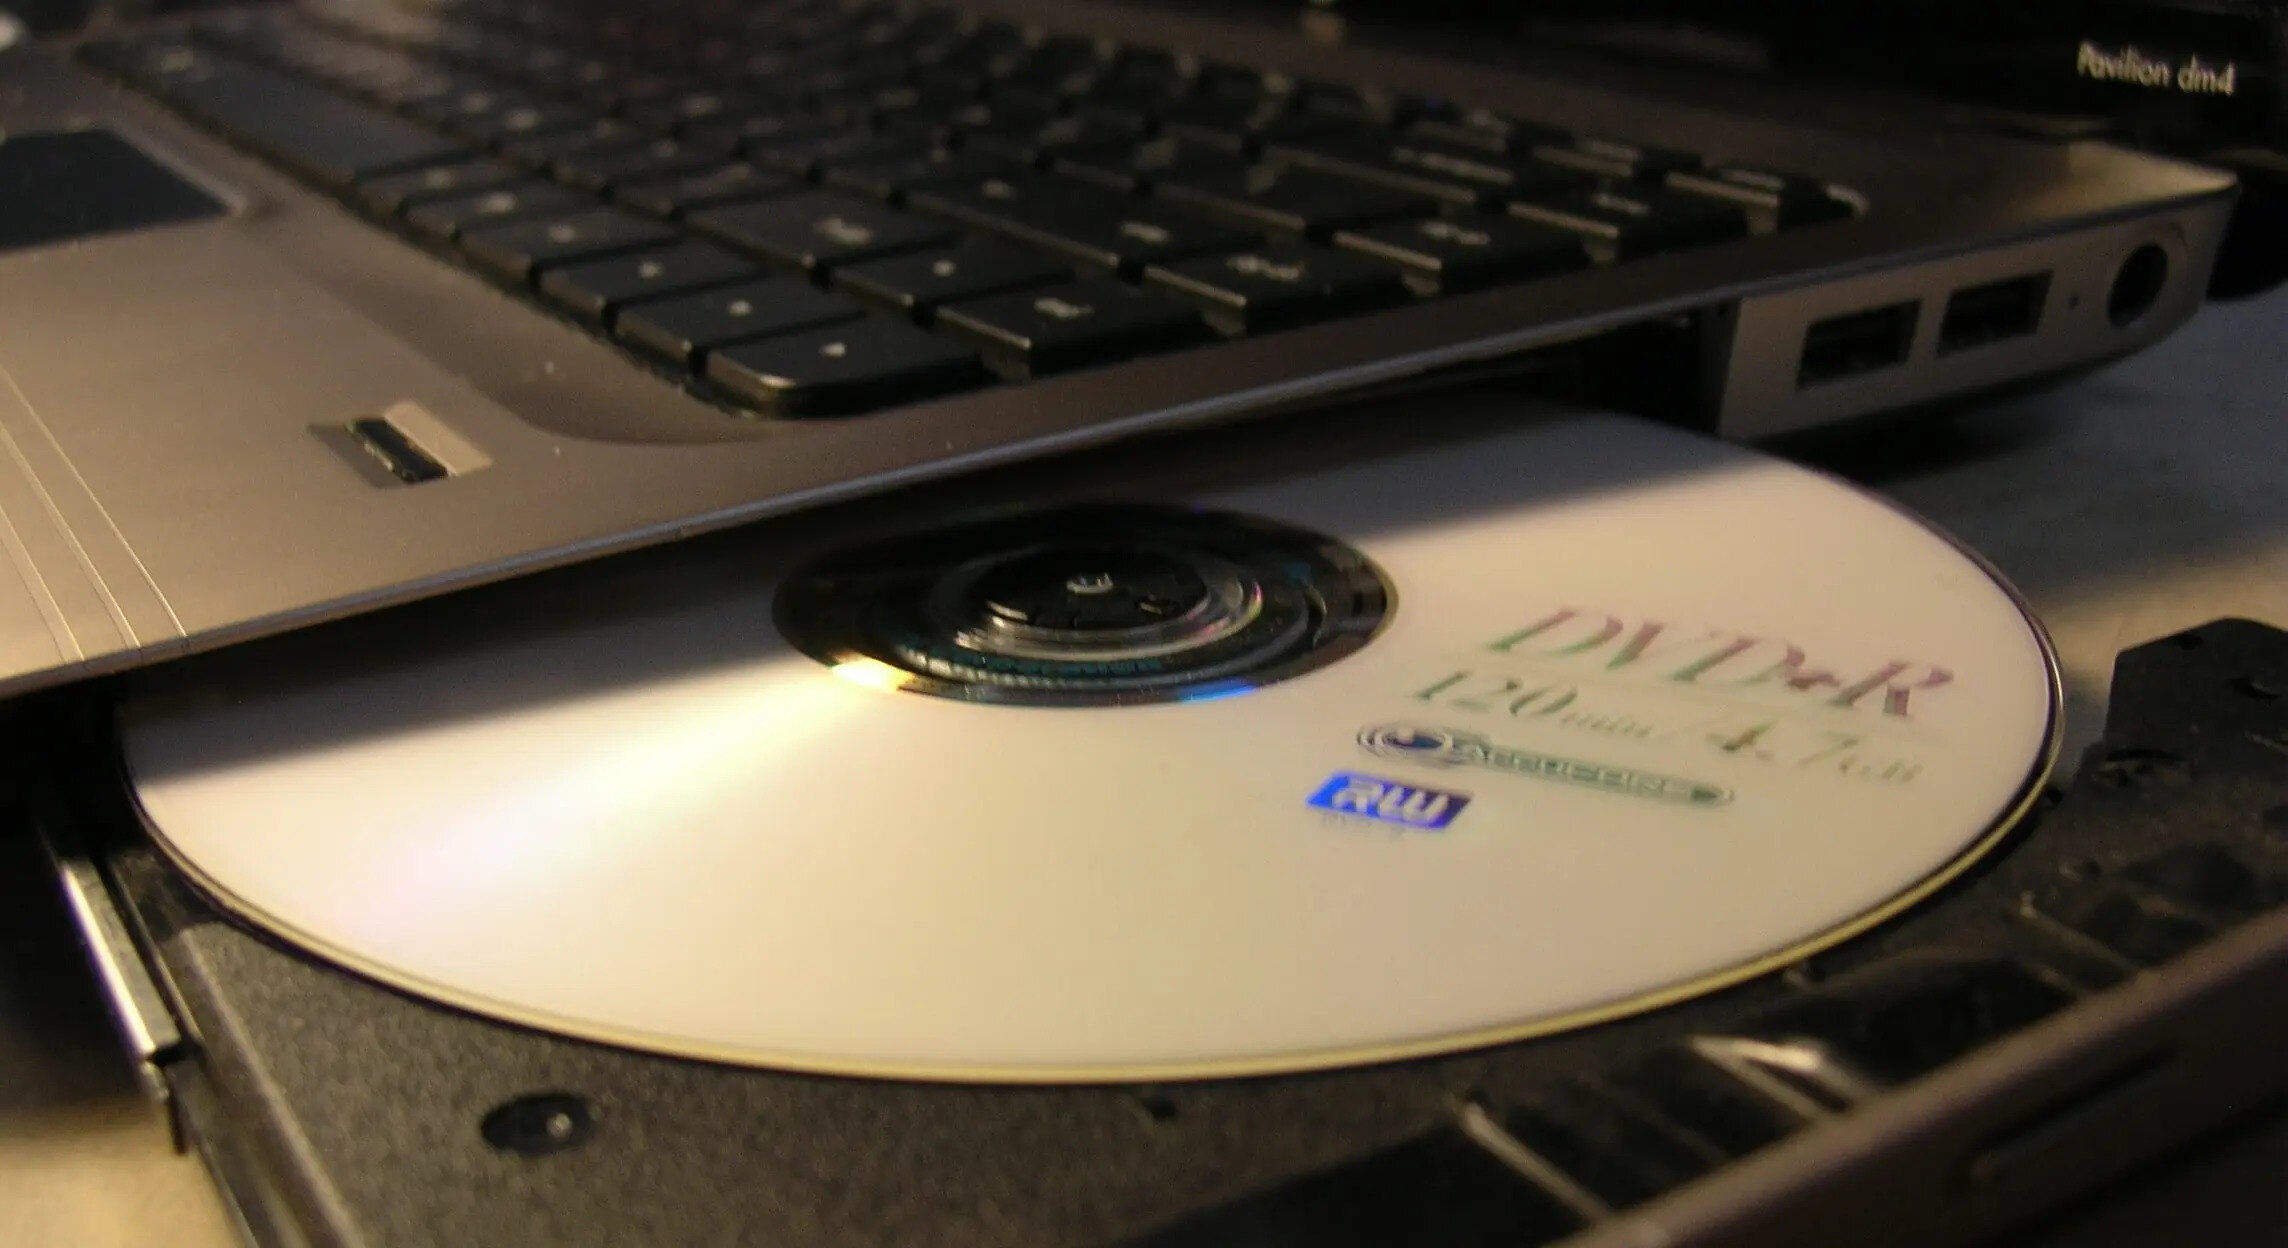 how-to-boot-from-a-cd-dvd-or-bd-disc